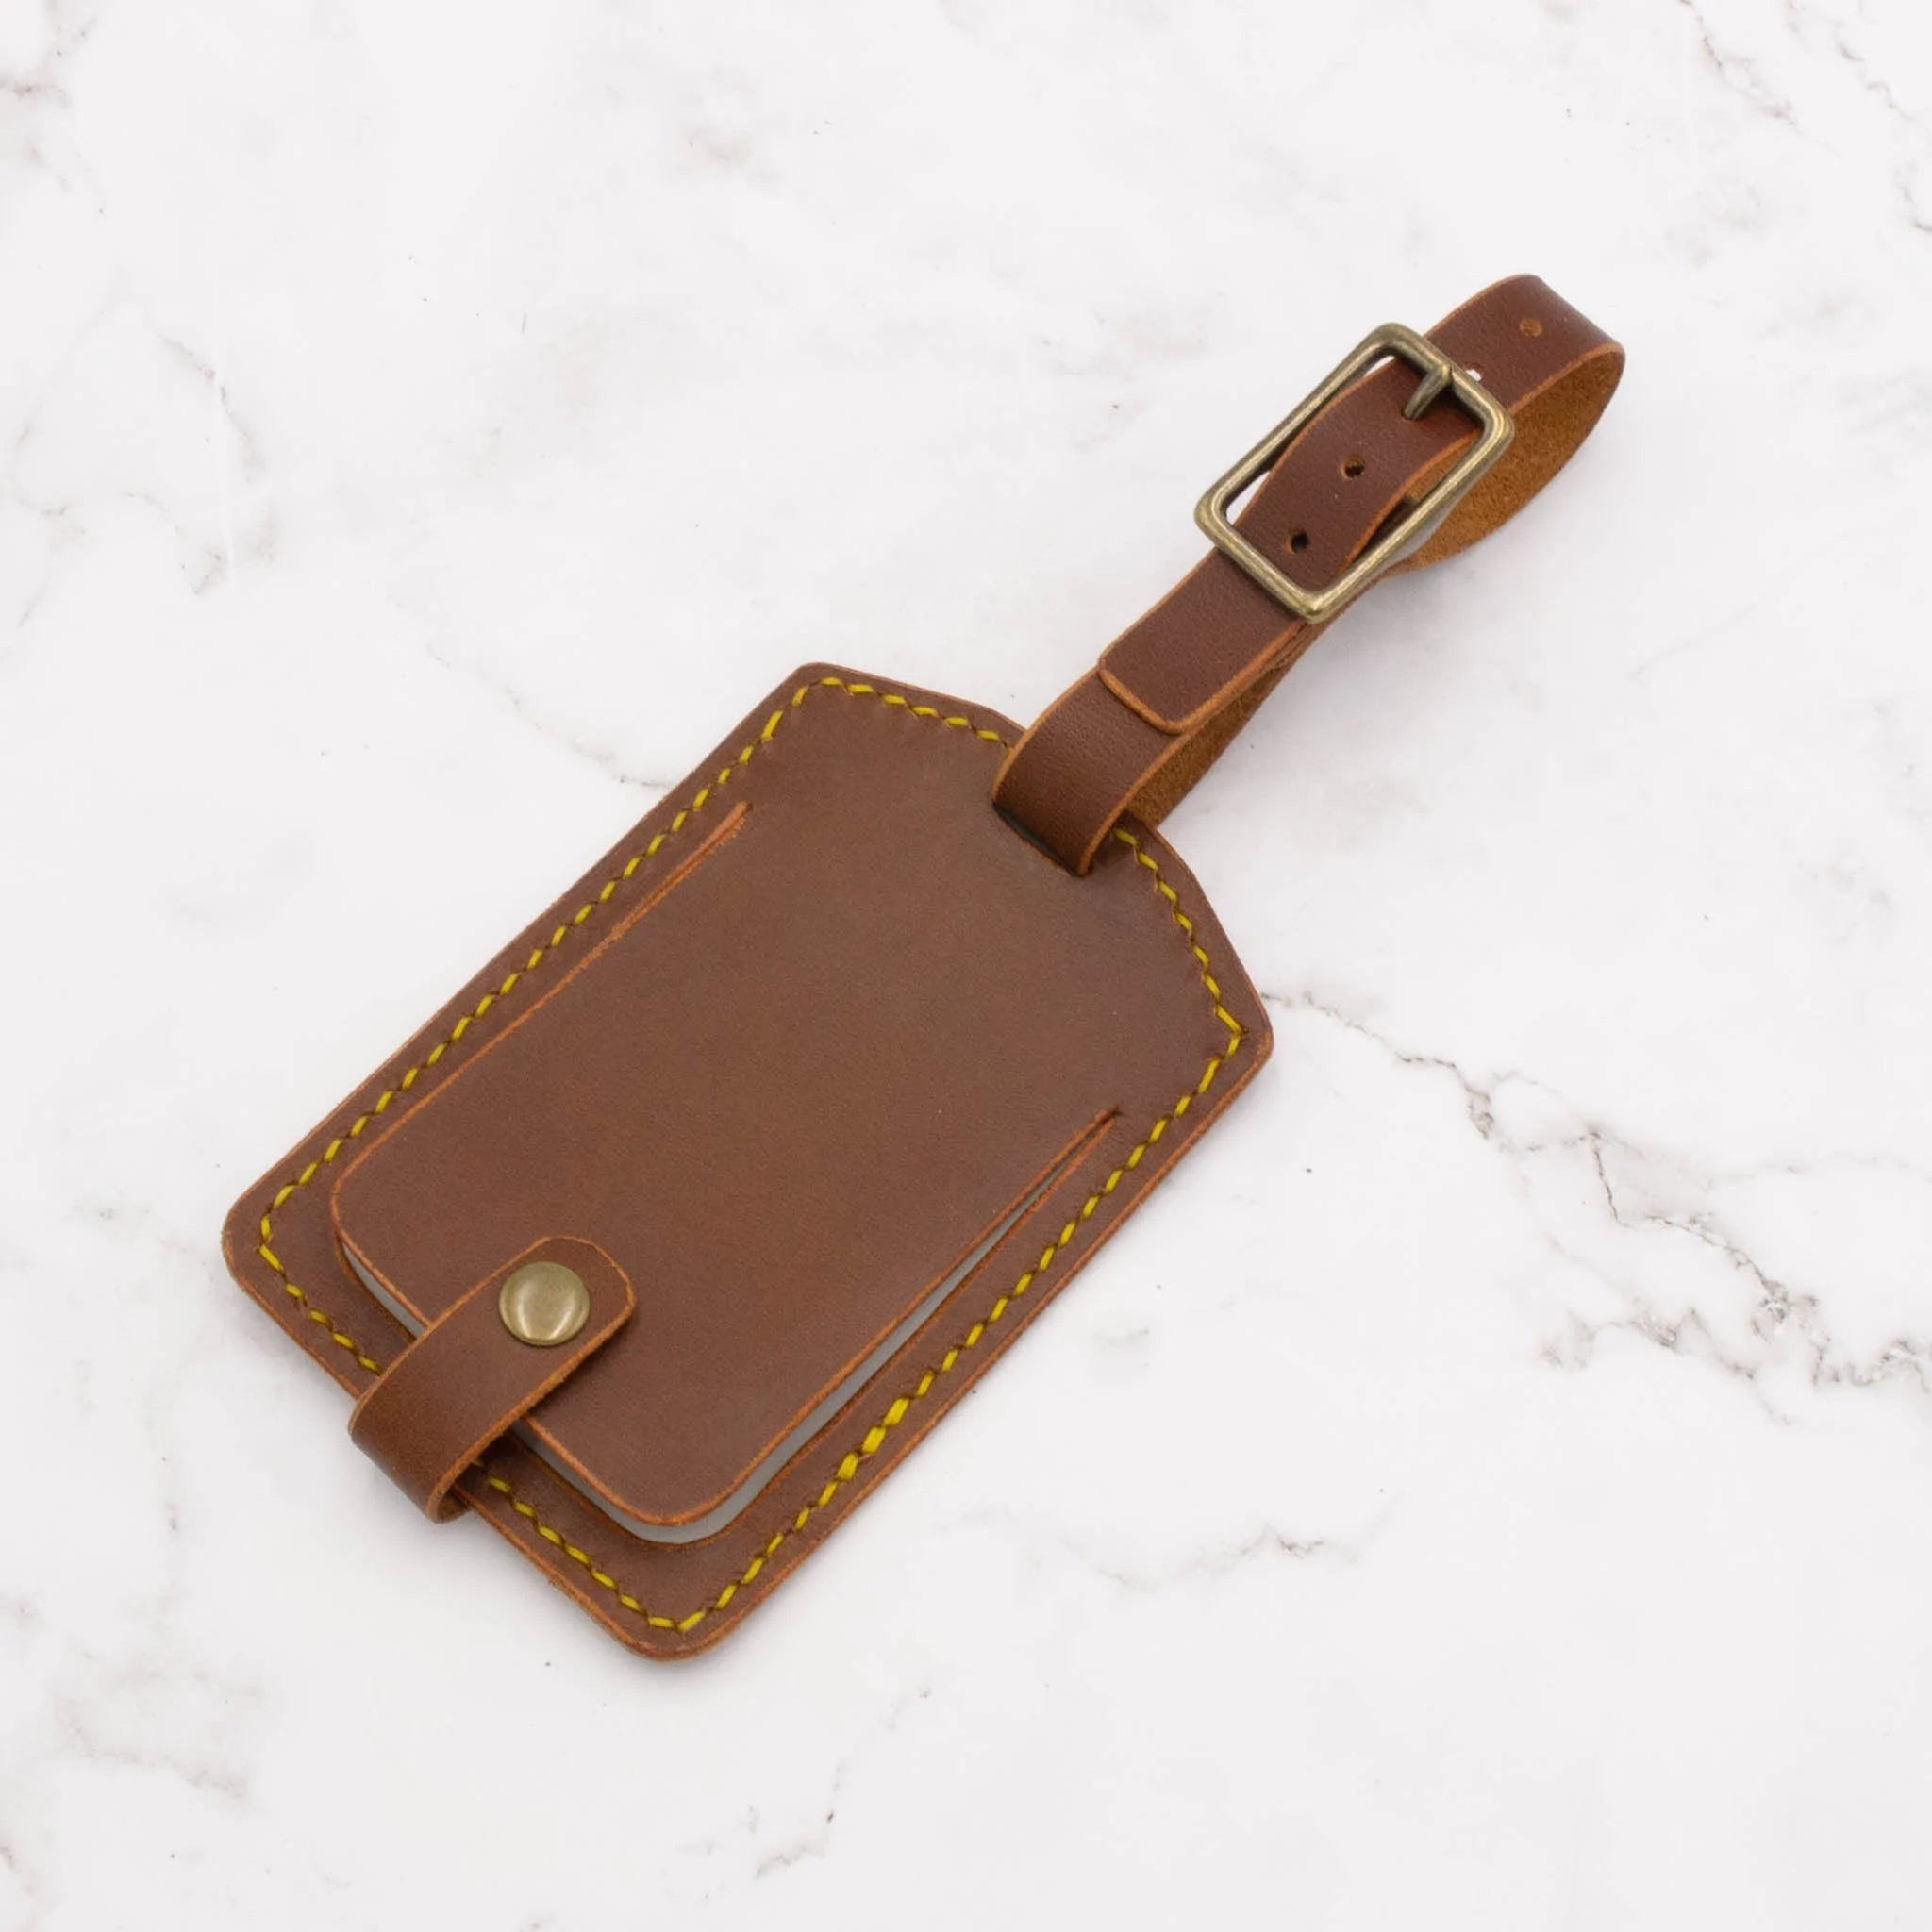 Arbor Trading Post Luggage Tag Classic Mahogany Handcrafted Leather Luggage Tag